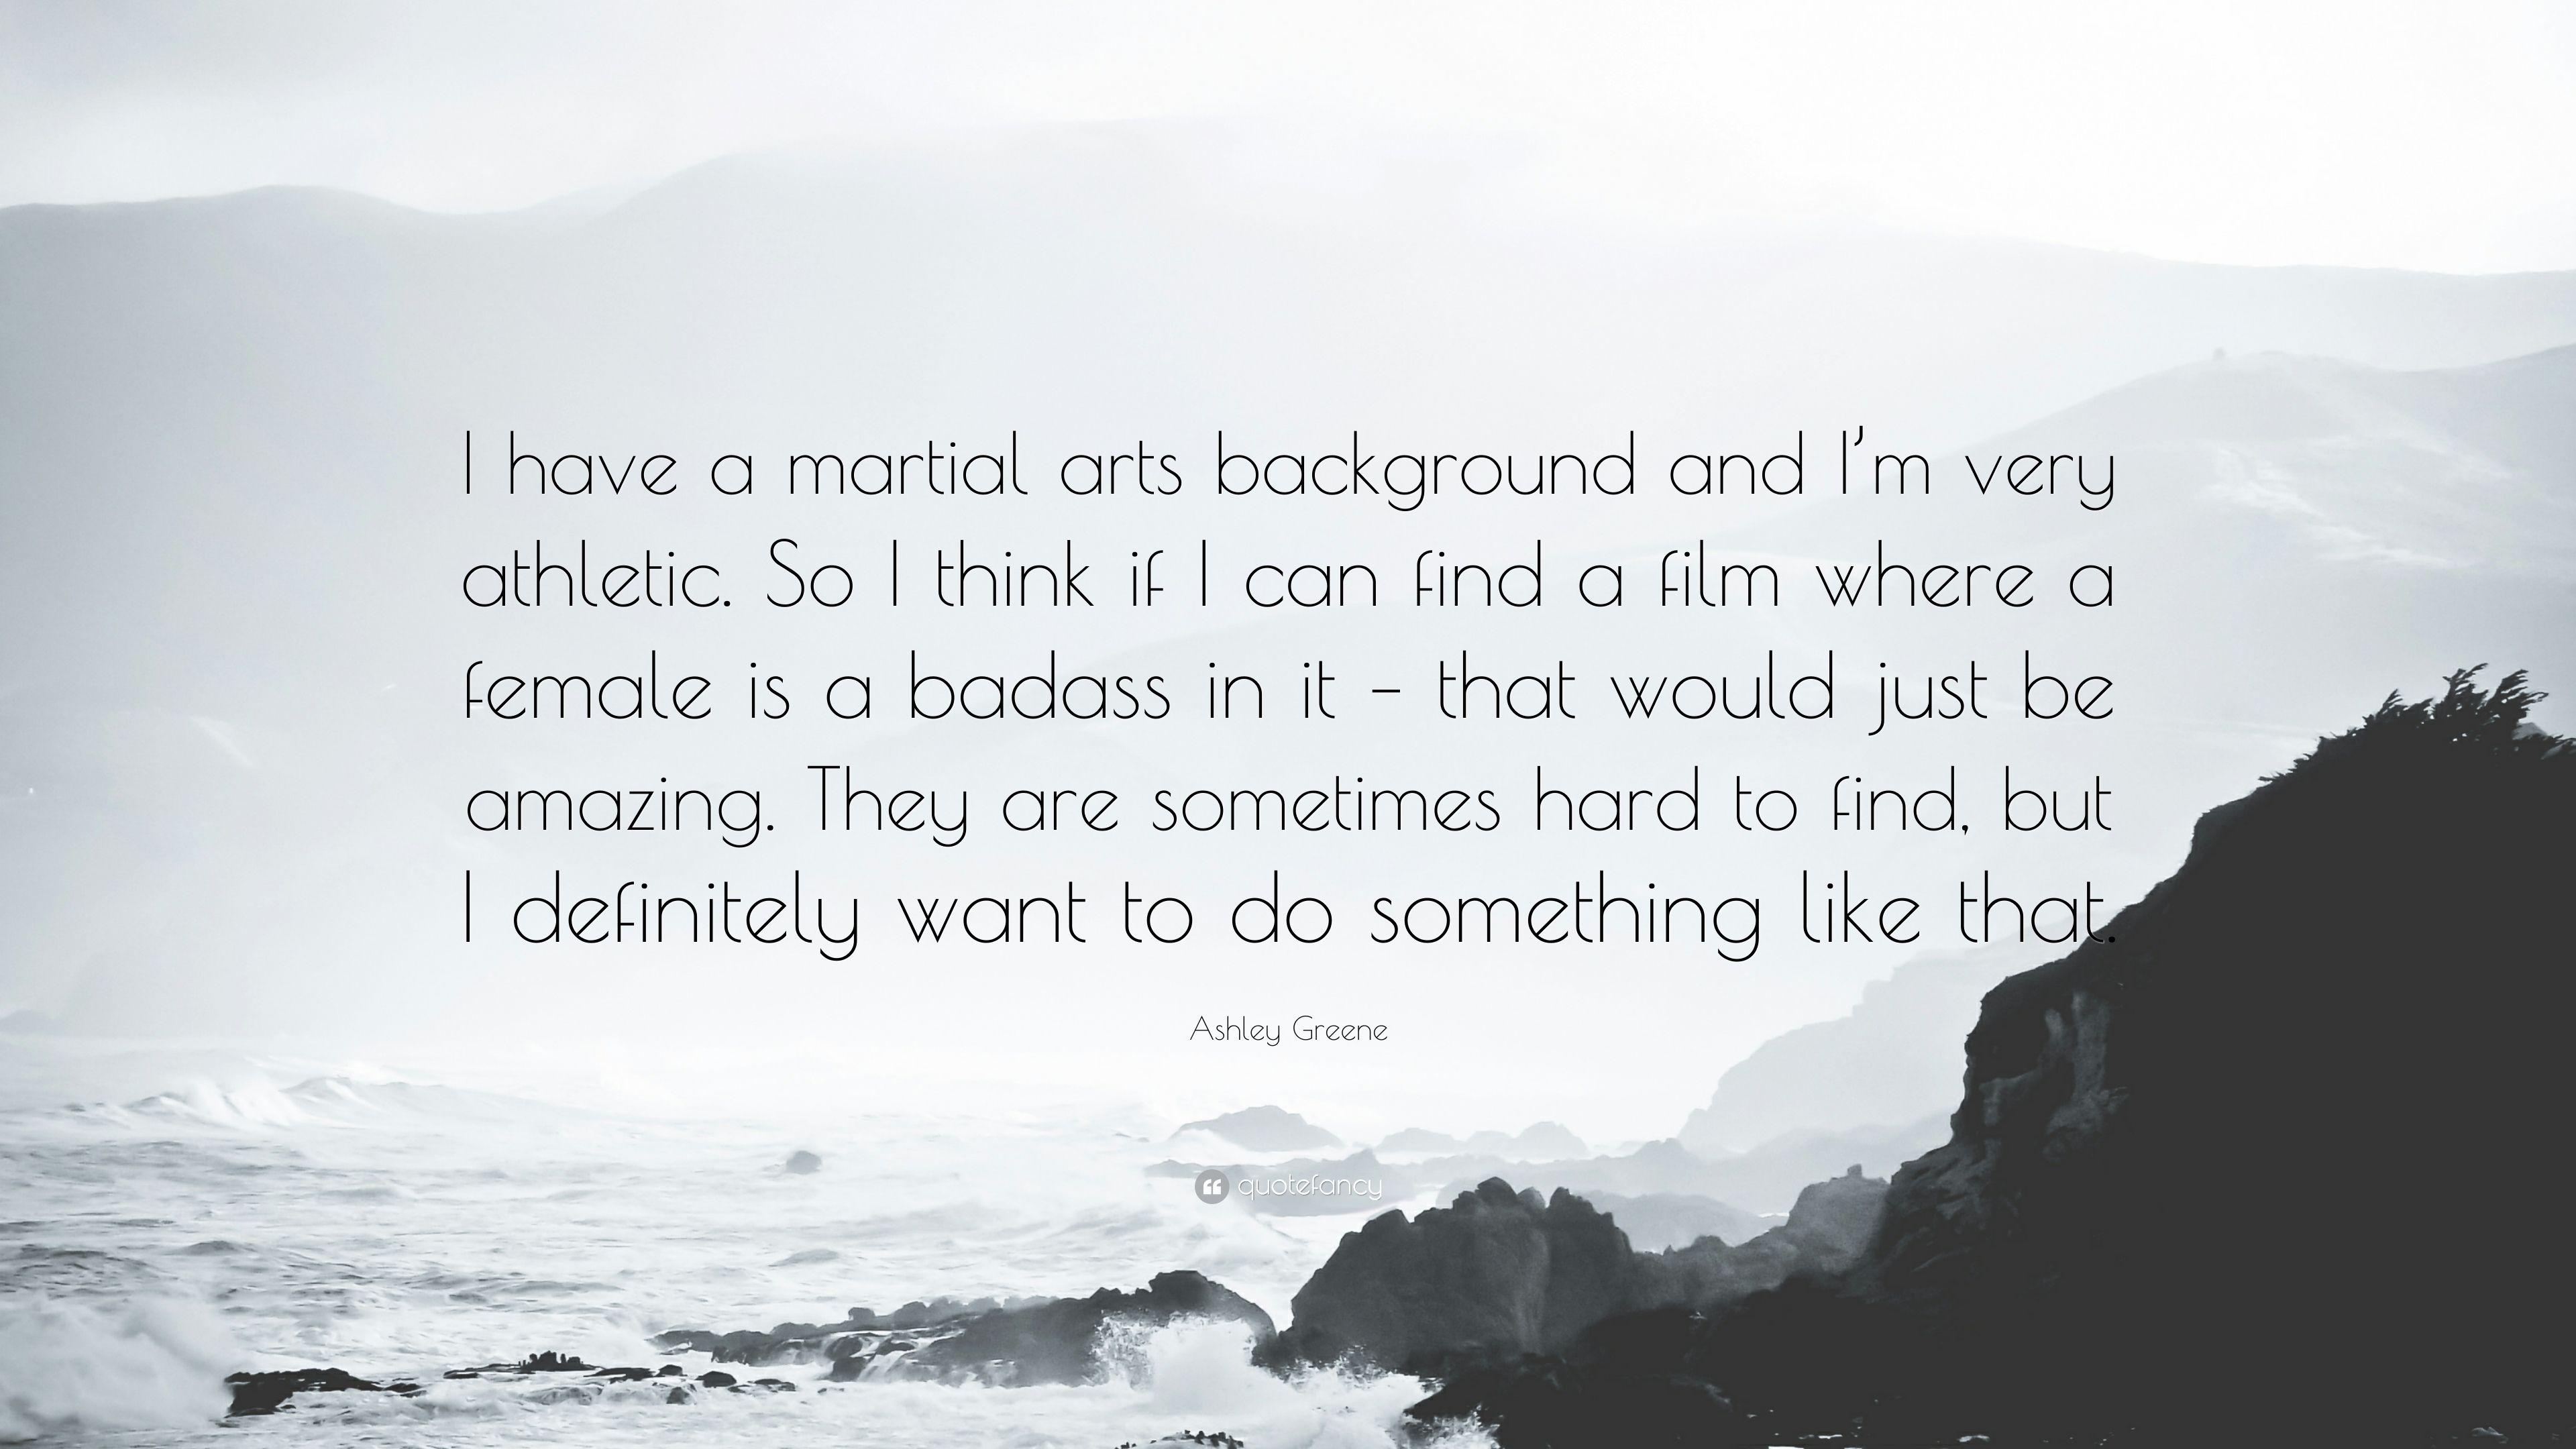 Ashley Greene Quote: “I have a martial arts background and I'm very